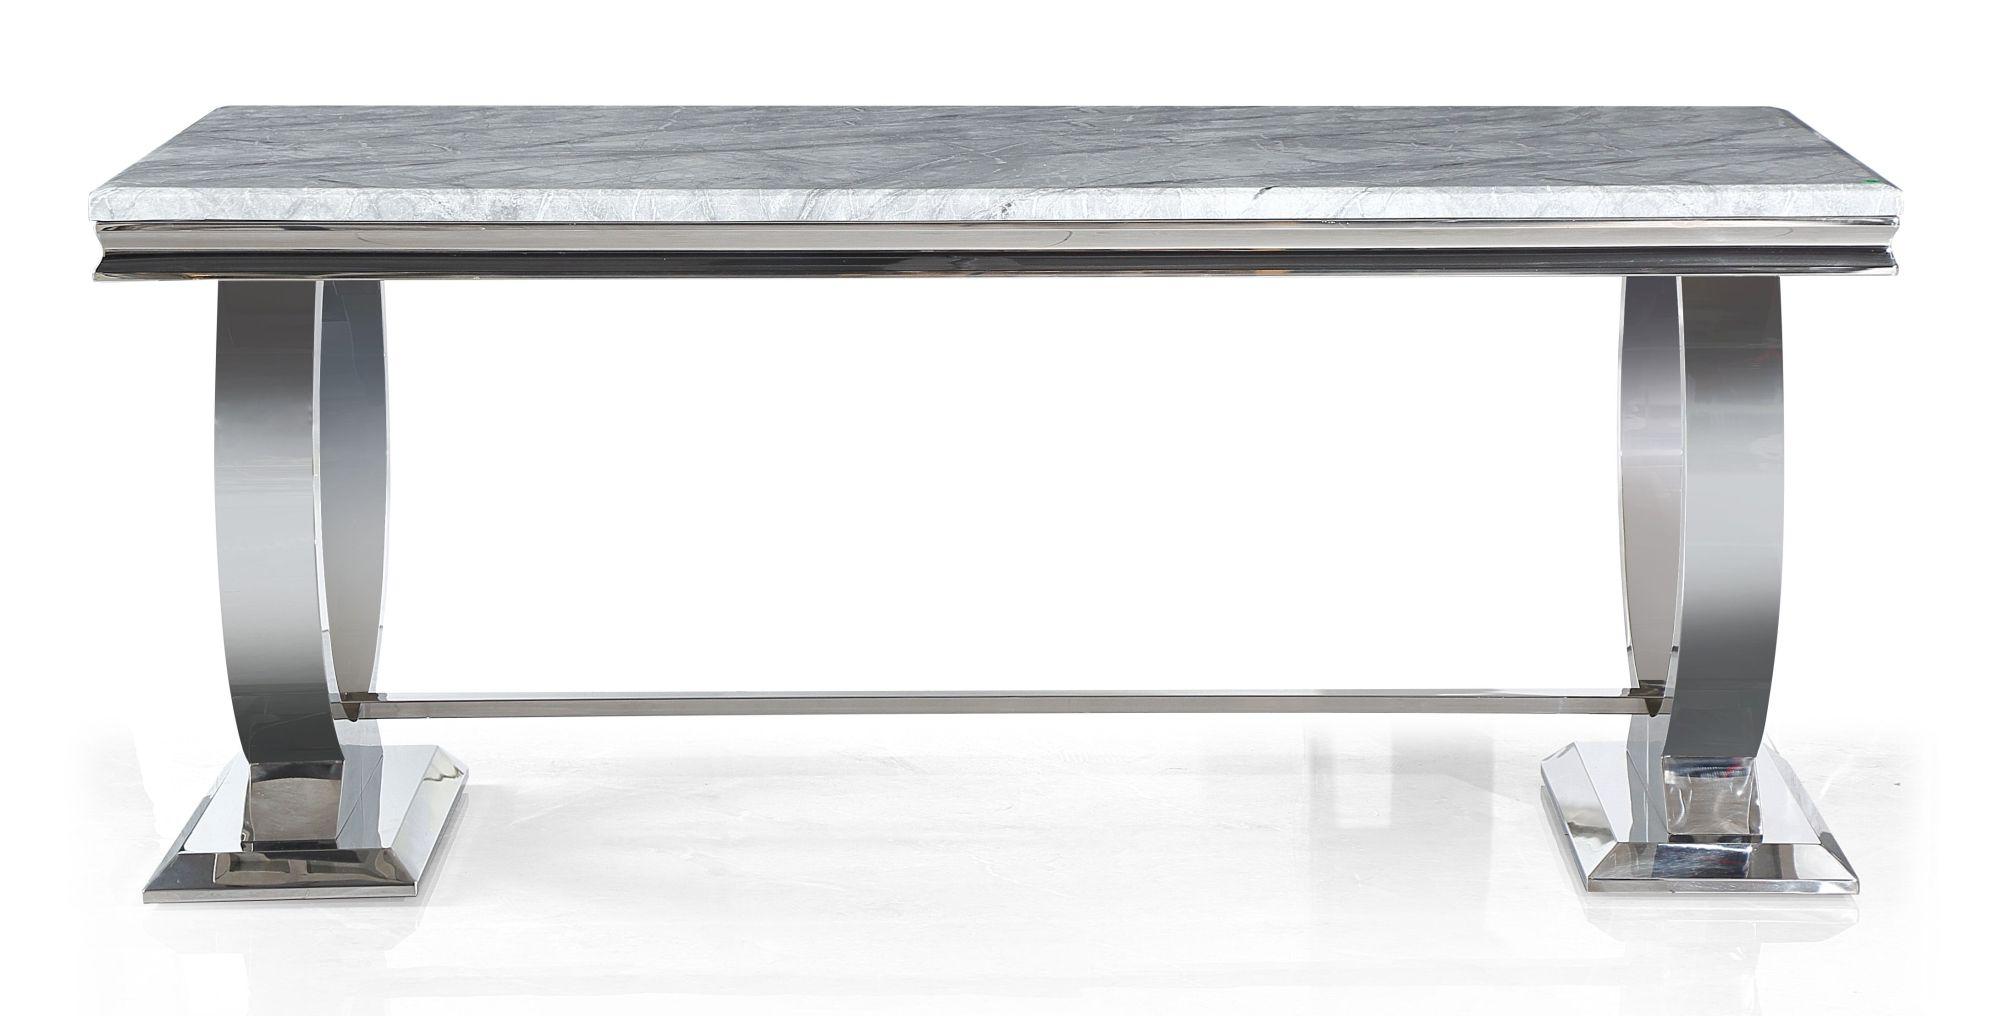 Glacier Marble Dining Table, Grey Rectangular Top with Ring Chrome Base - 8 Seater